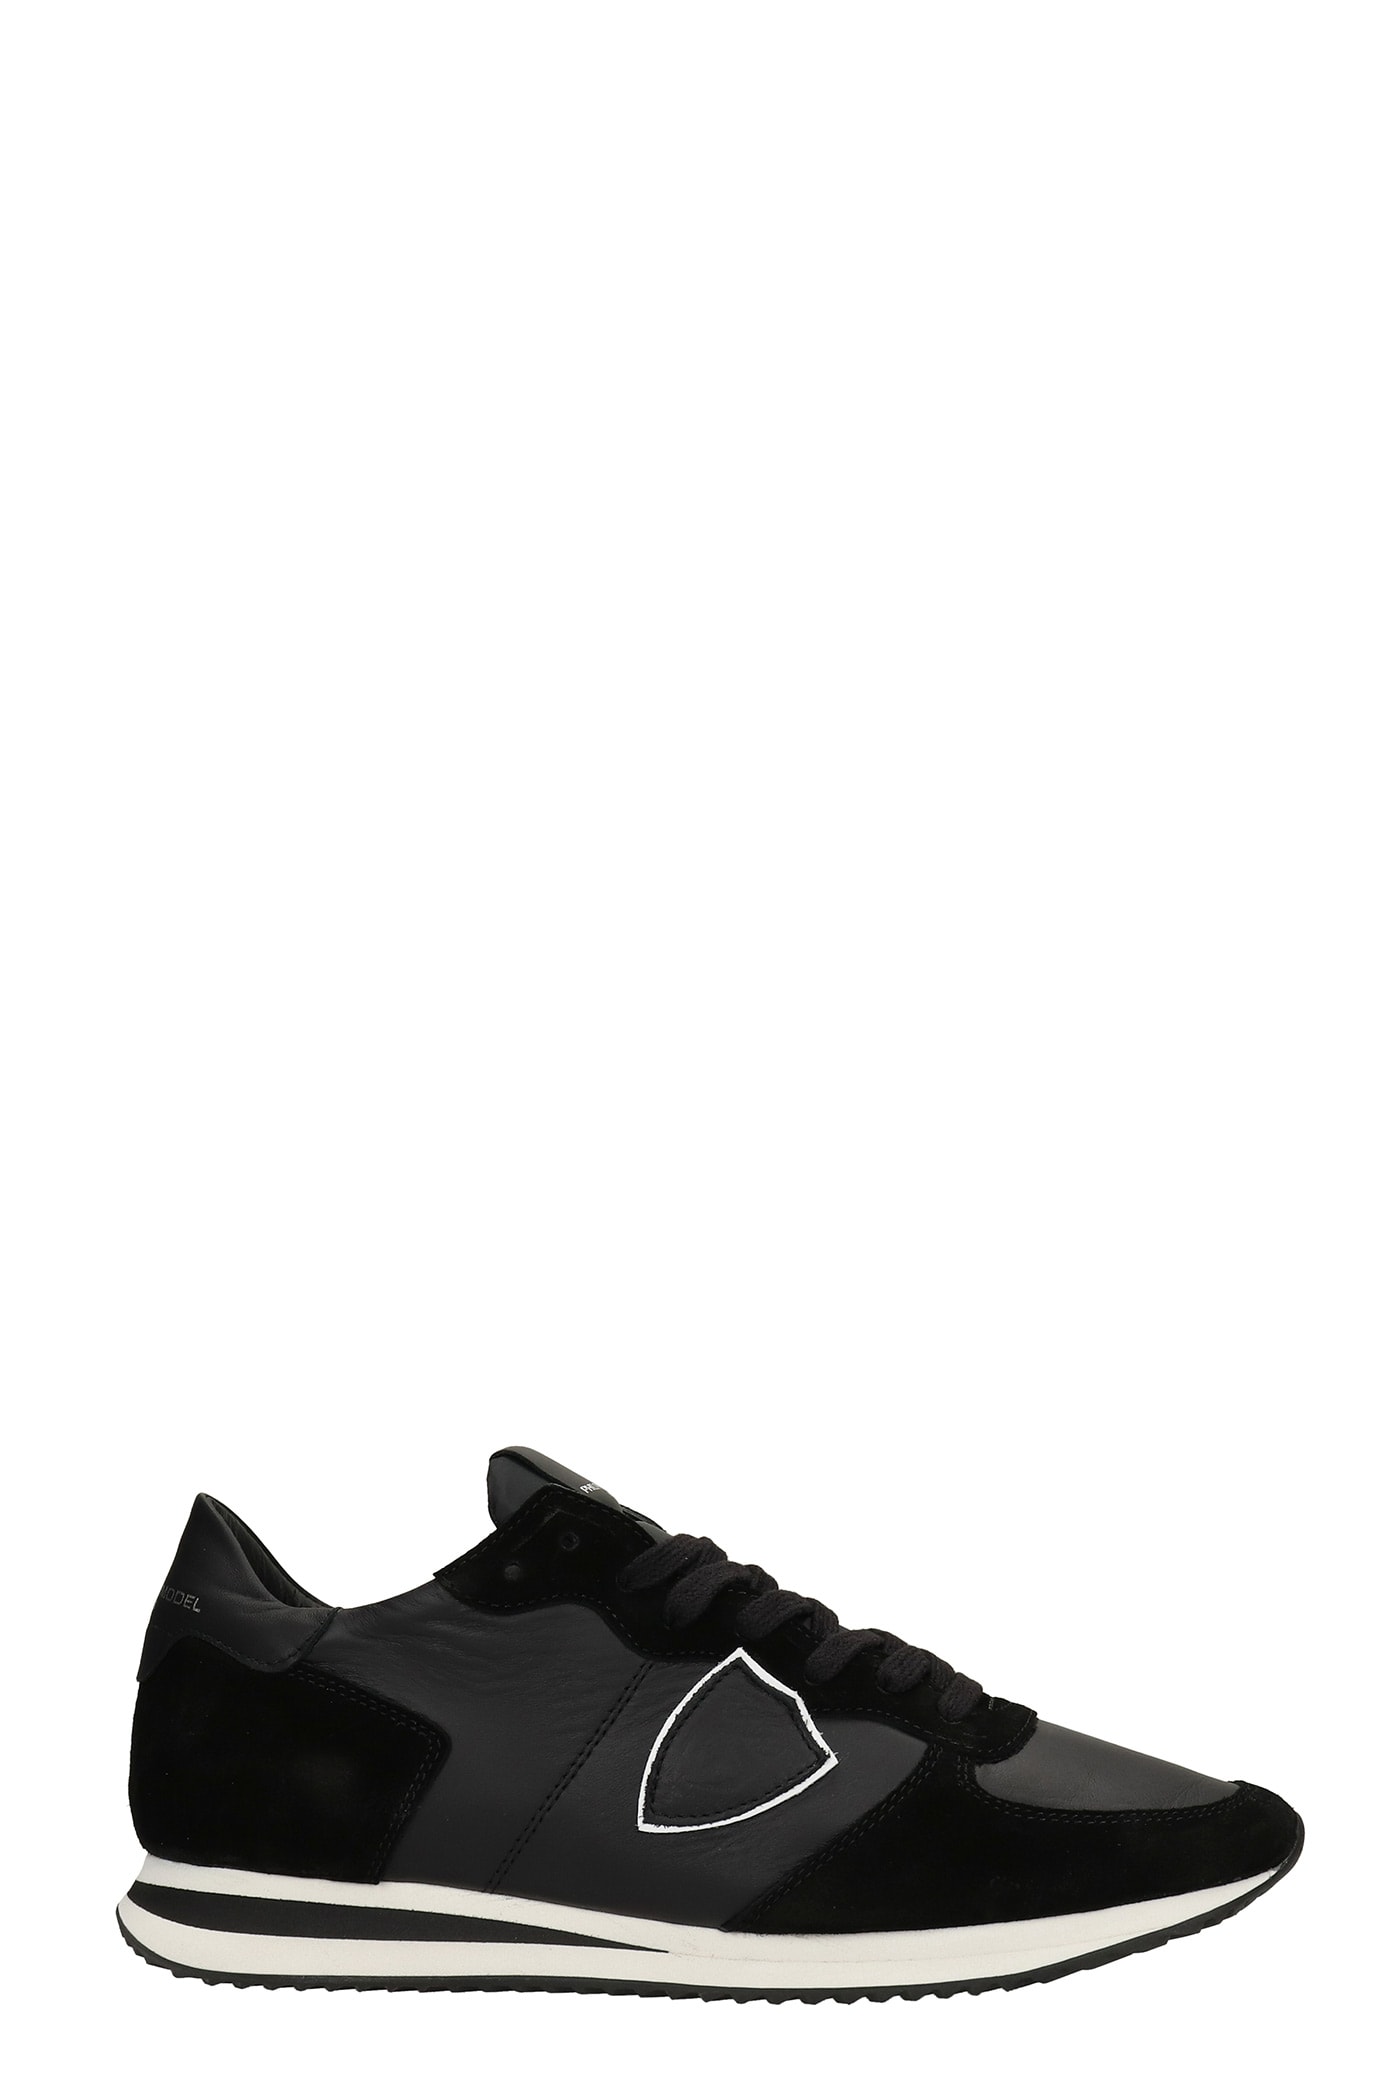 Philippe Model Trpx Sneakers In Black Suede And Leather